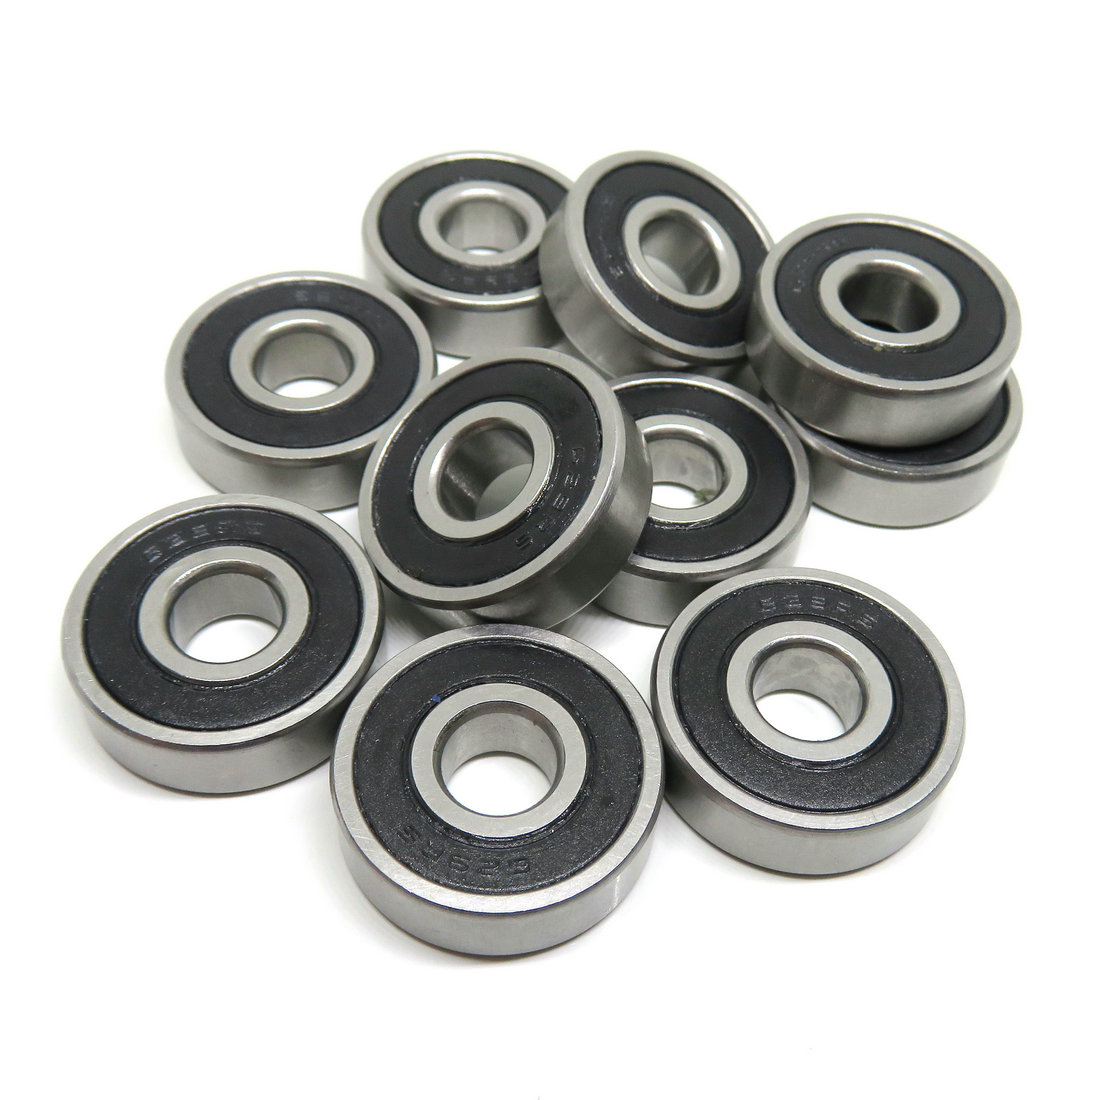 Stable Performance 628-2RS Bearing Steel 8x24x8mm Deep Groove Ball Bearings 628RS For Office Equipment.jpg